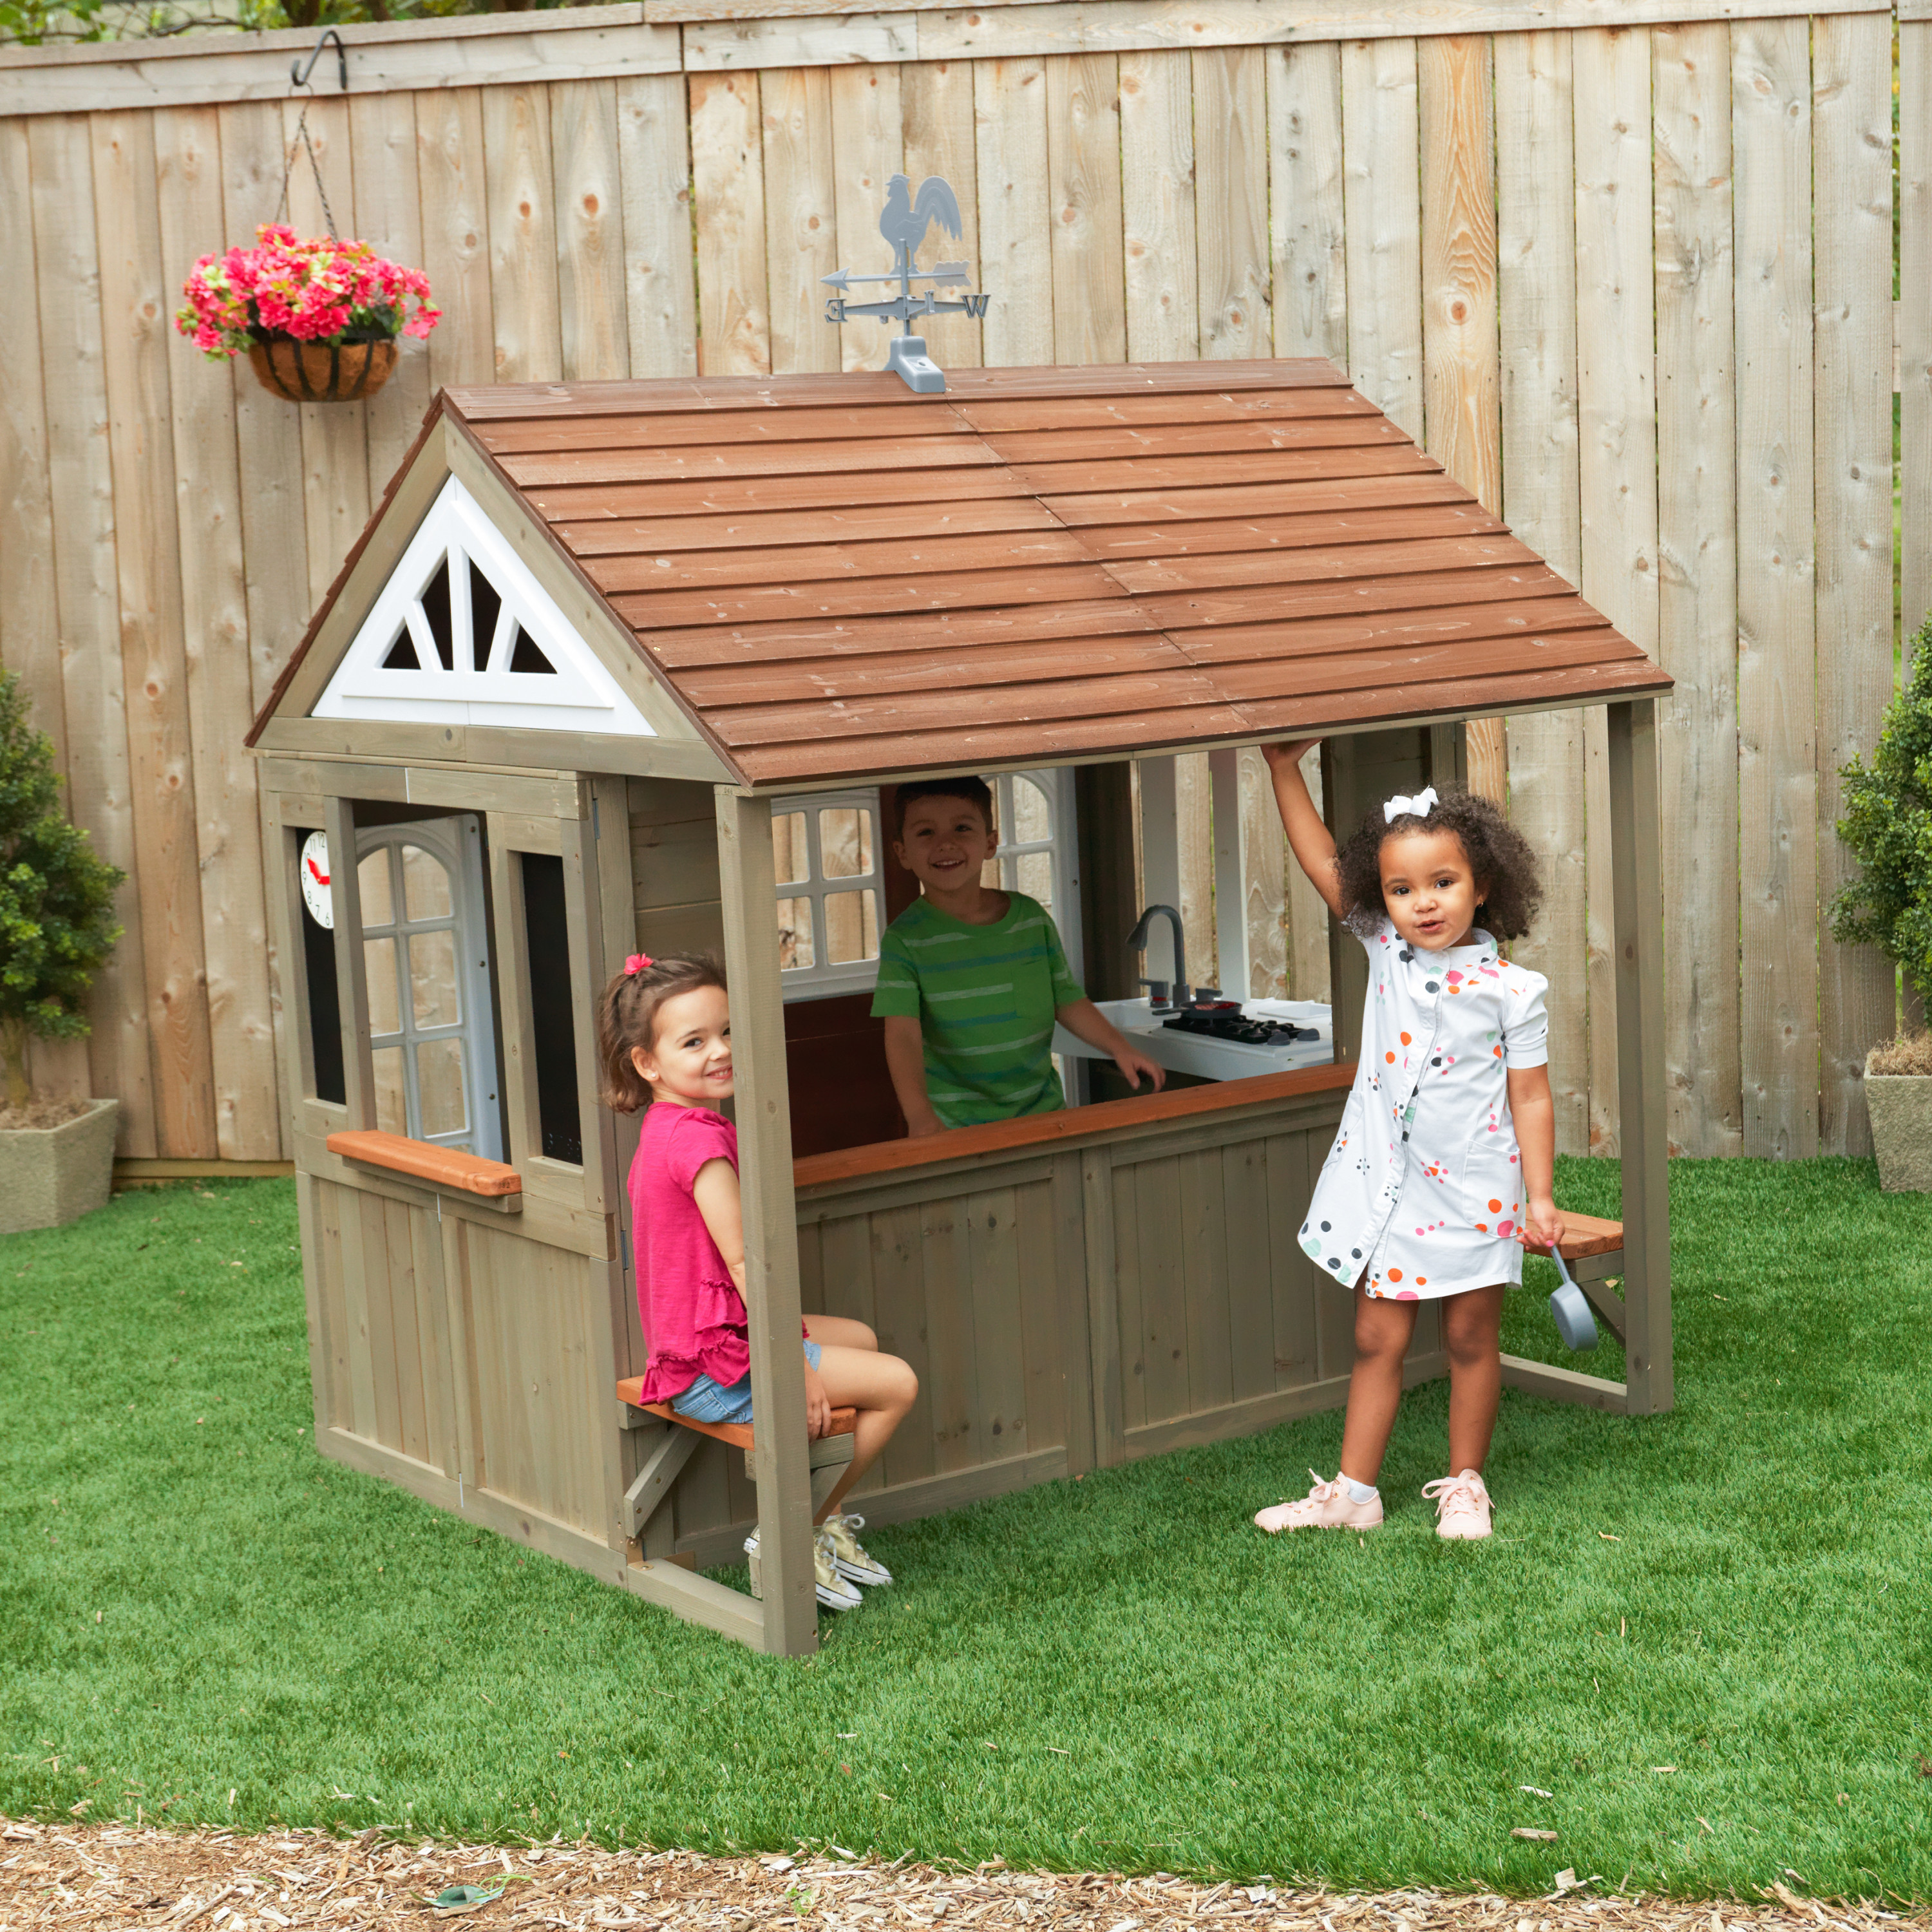 KidKraft Country Vista Wooden Outdoor Playhouse with Double Doors, Play Kitchen & Benches - image 3 of 28